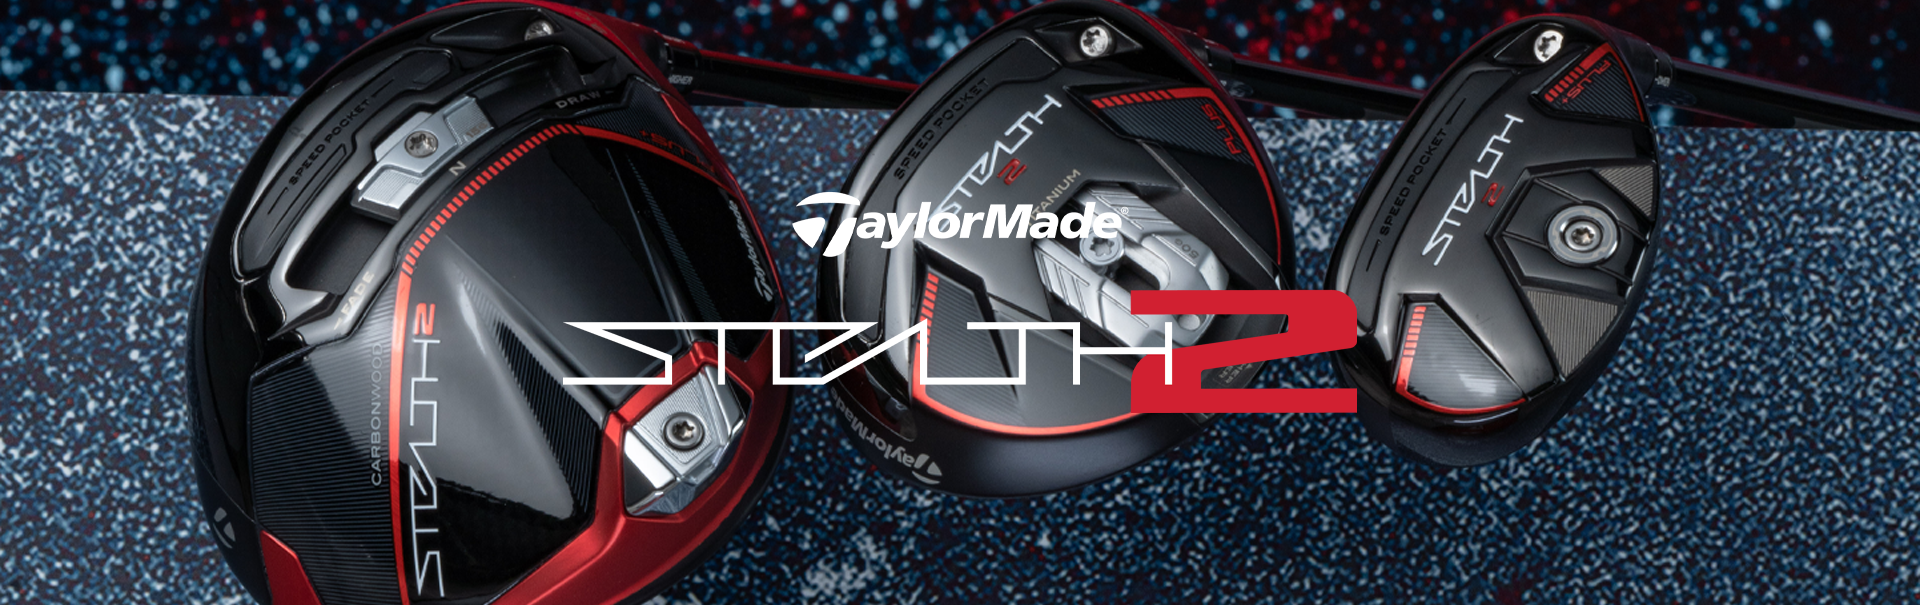 TaylorMade Stealth 2